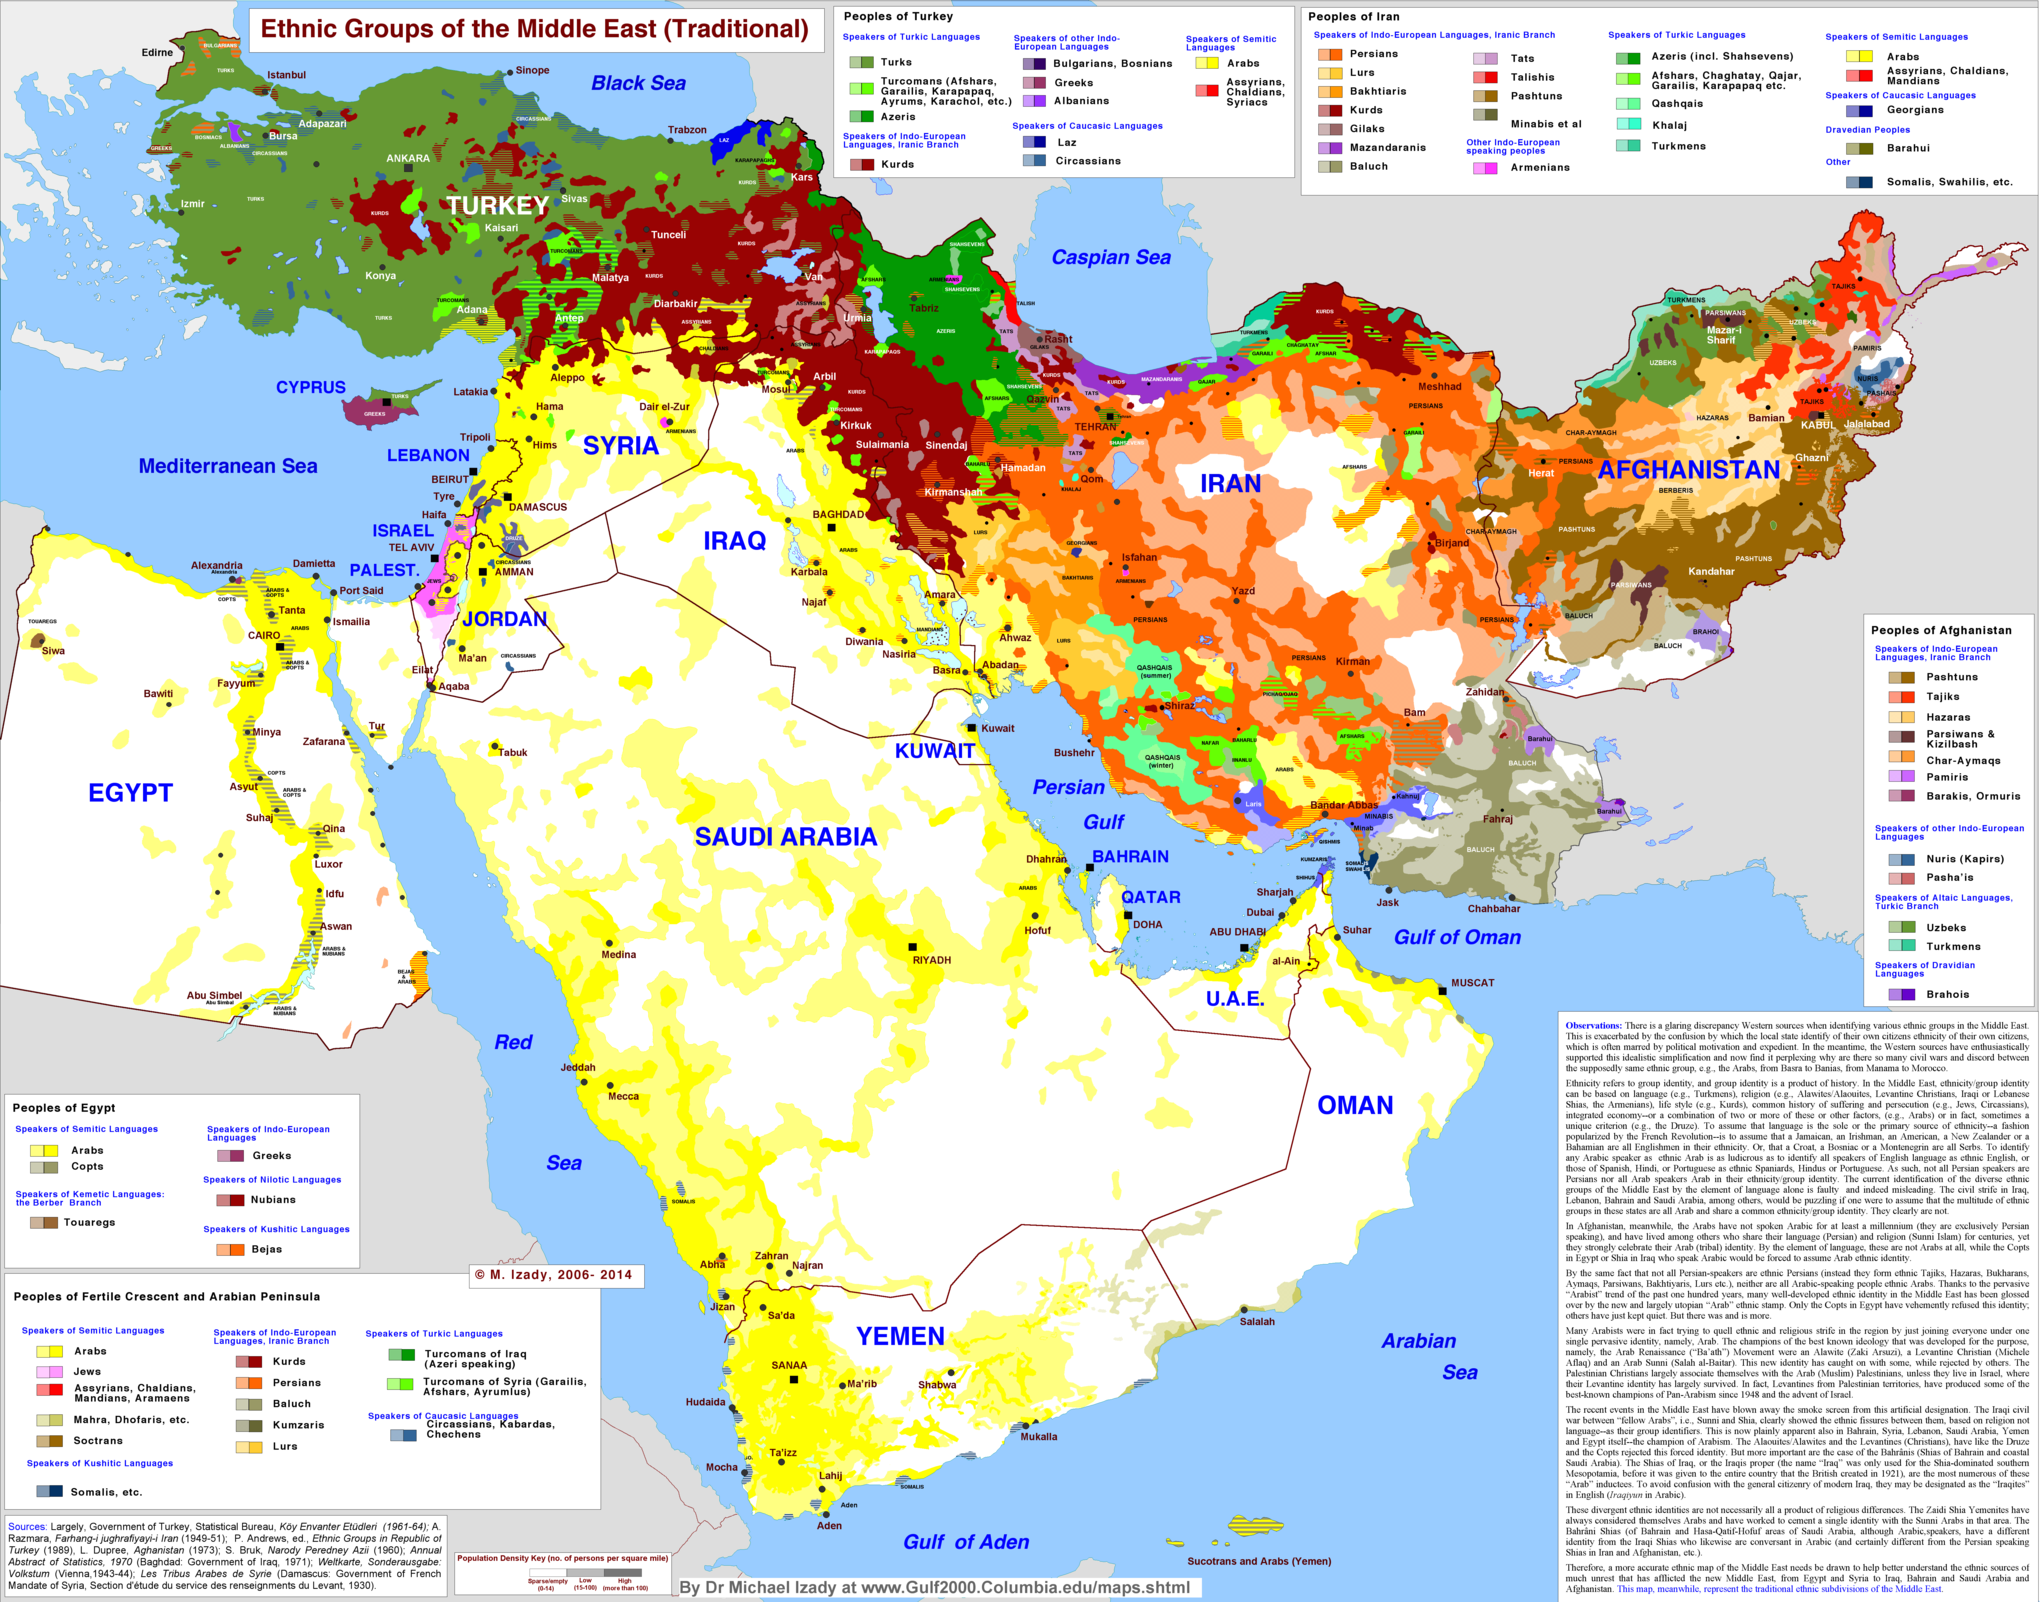 The ethnic groups of the Middle East